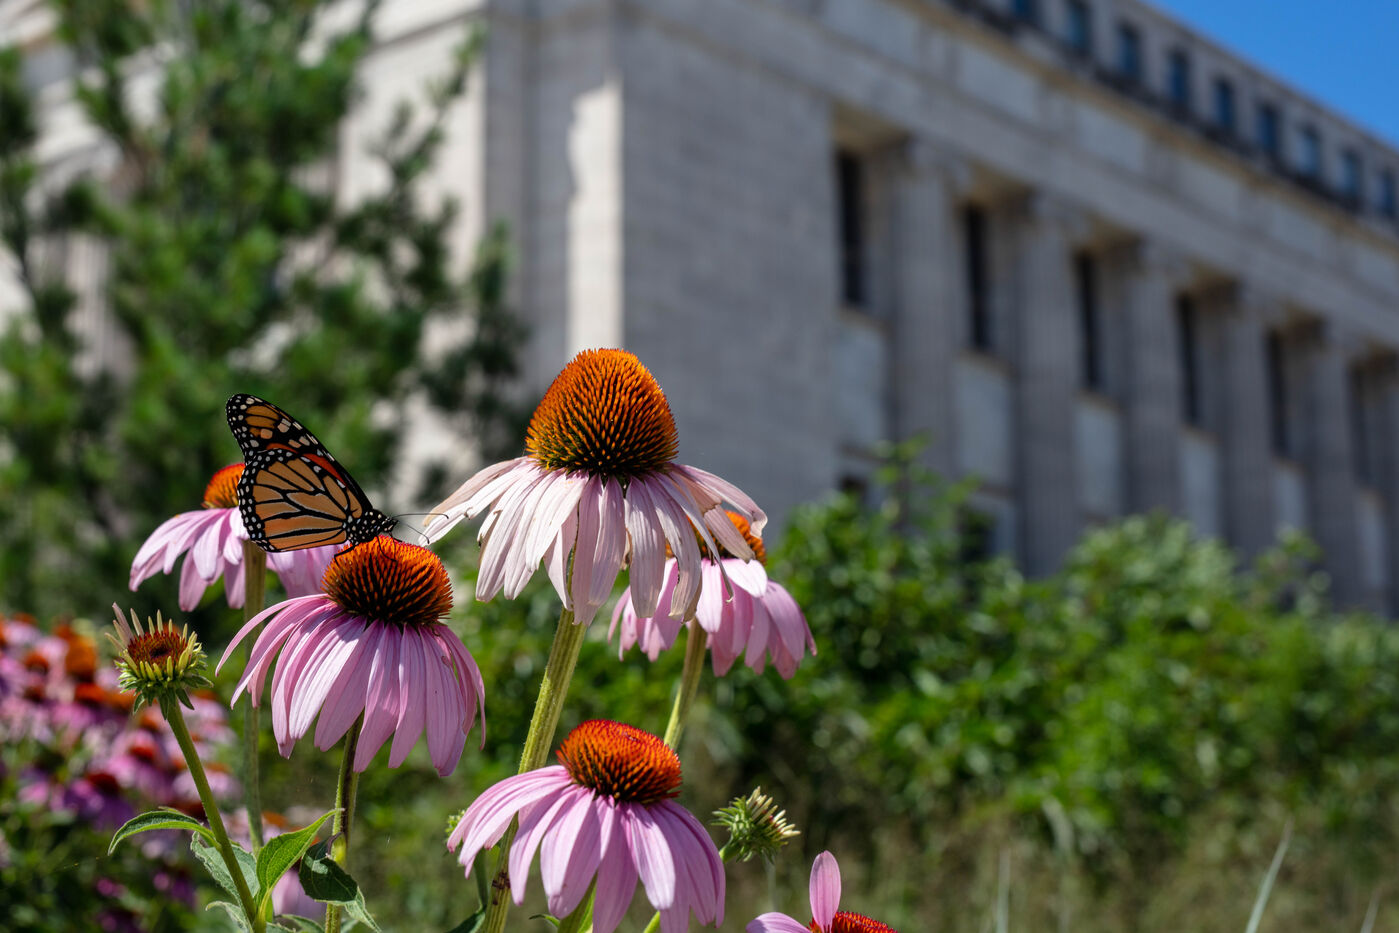 A monarch butterly sits perched on one of a group of purple cone flowers, with the Museum building blurred in the background.